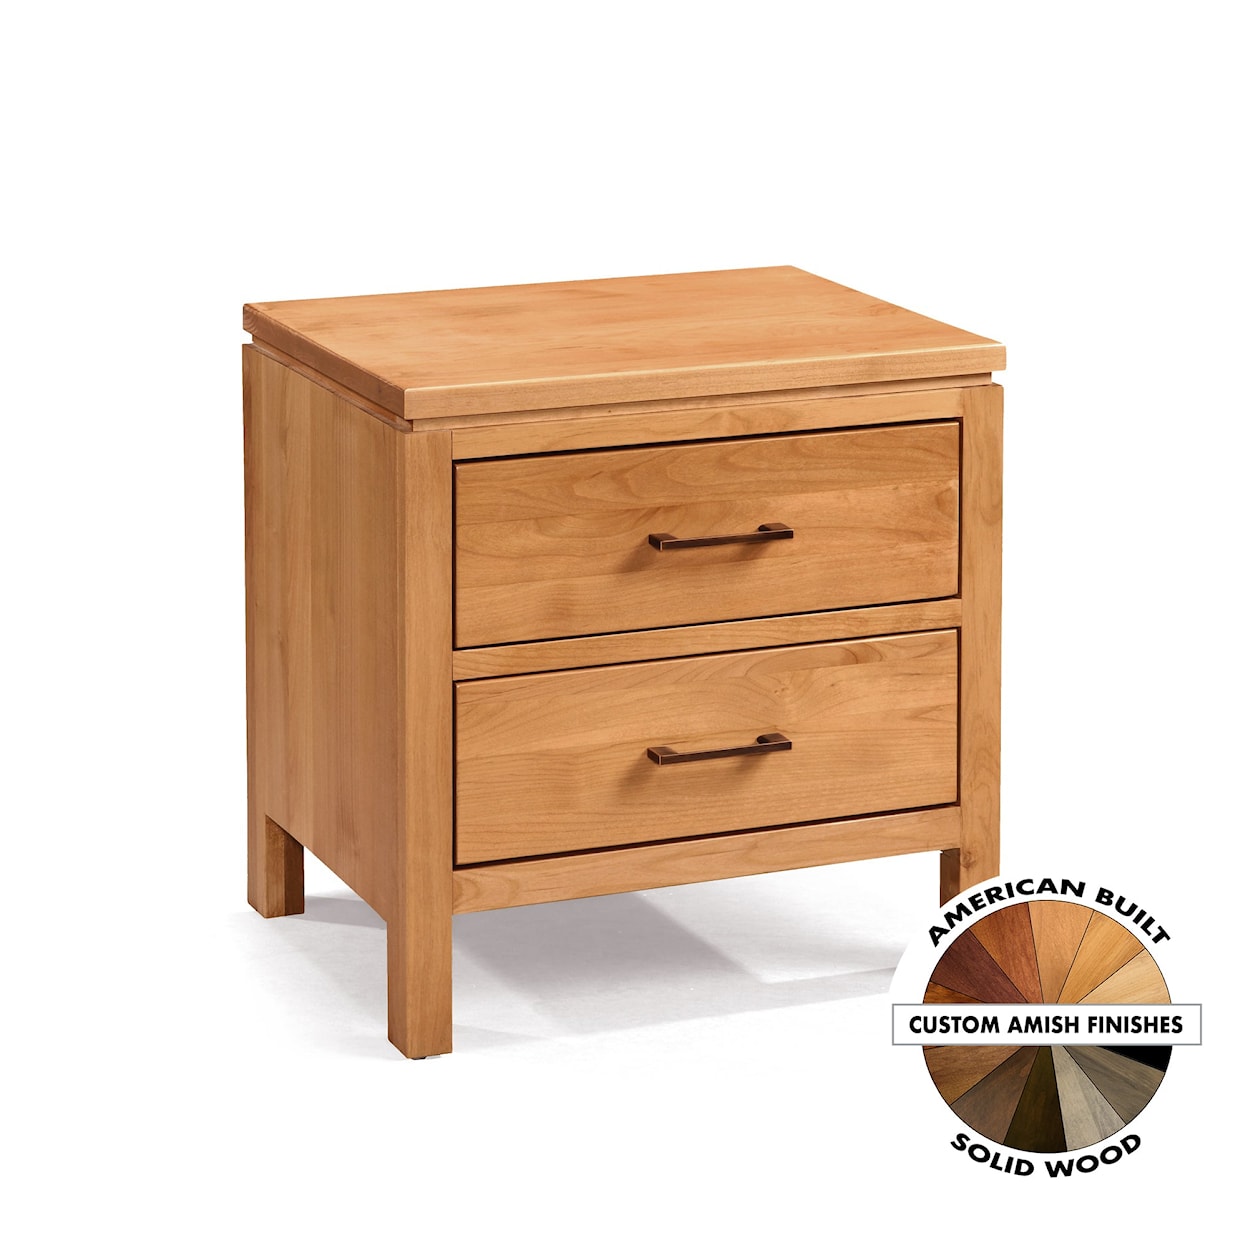 Archbold Furniture 2 West Contemporary 2 Drawer Nightstand